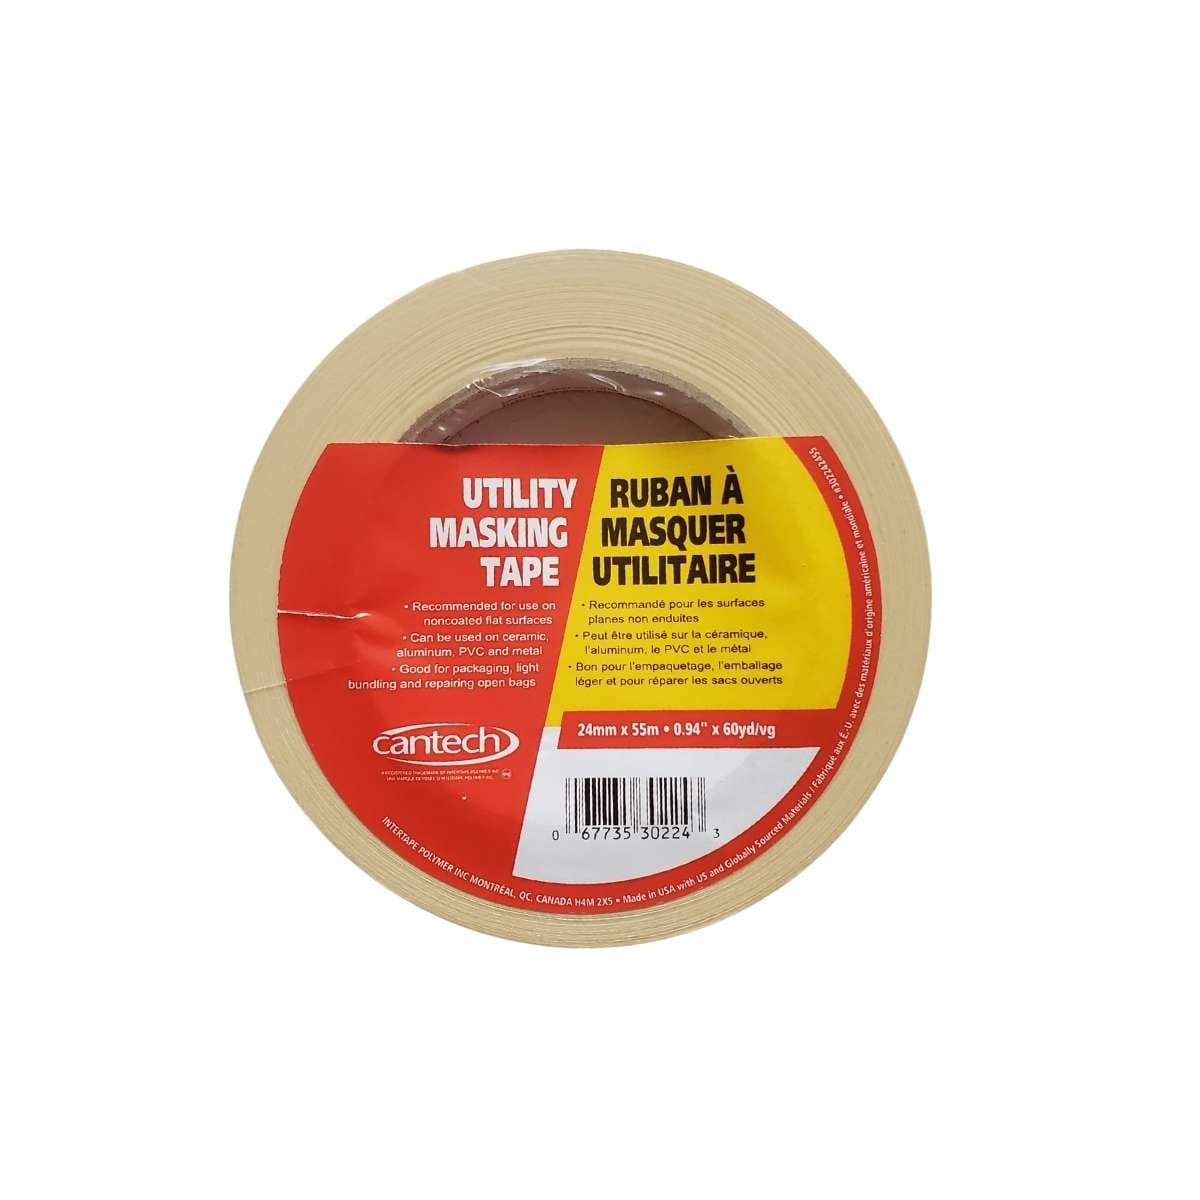 CANTECH MASKING TAPE Cantech - Utility Masking Tape - 24mm x 55m Roll - Item #302242455